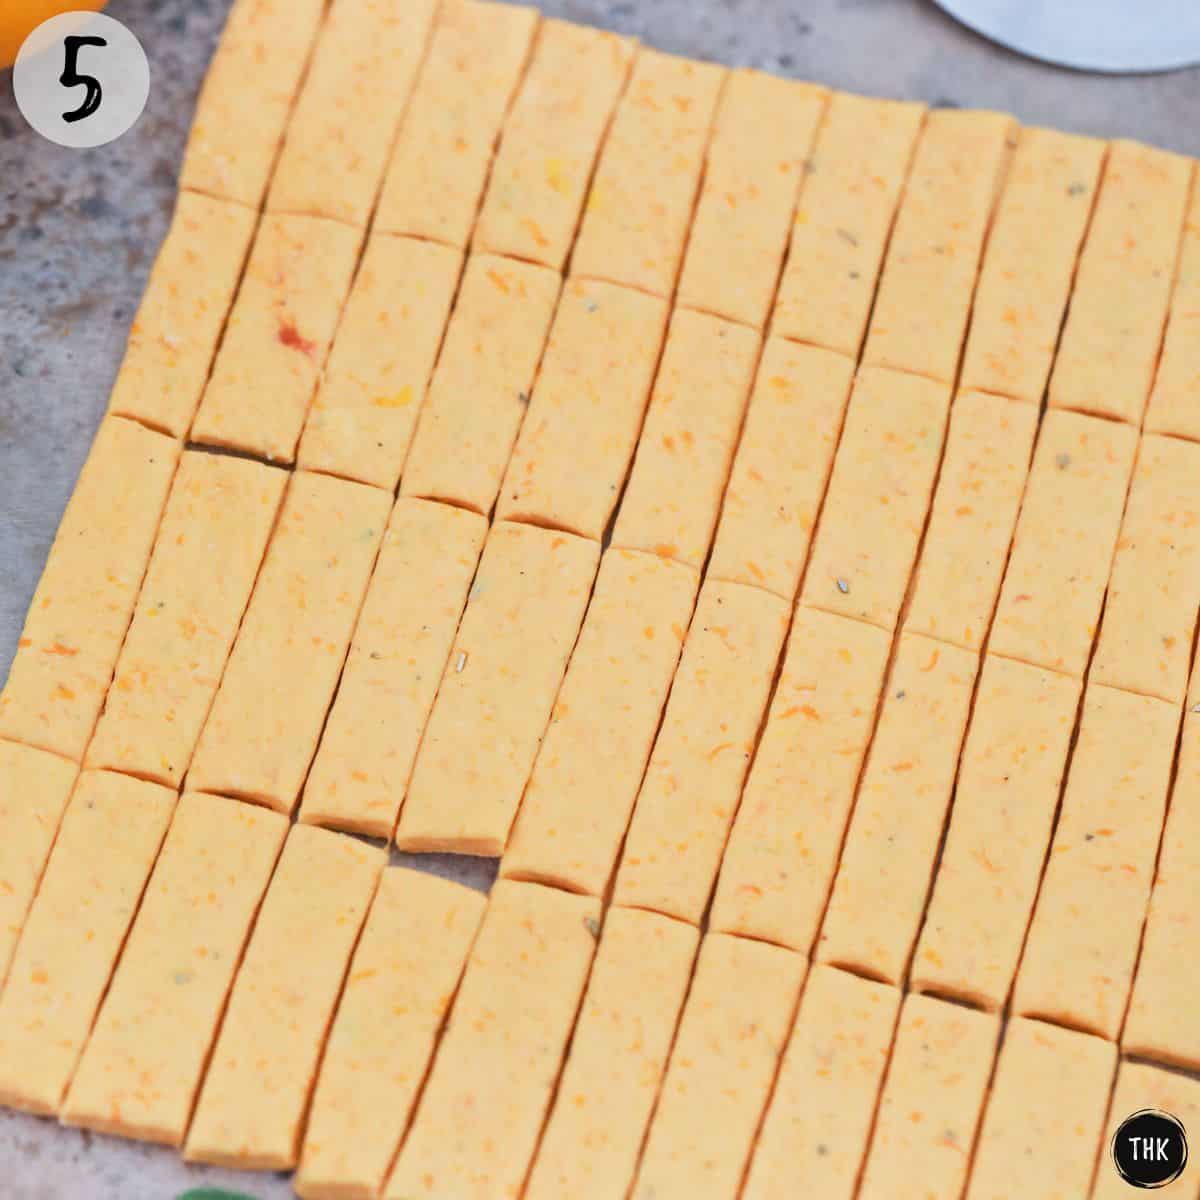 Orange coloured dough stretched and cut into grid pattern.